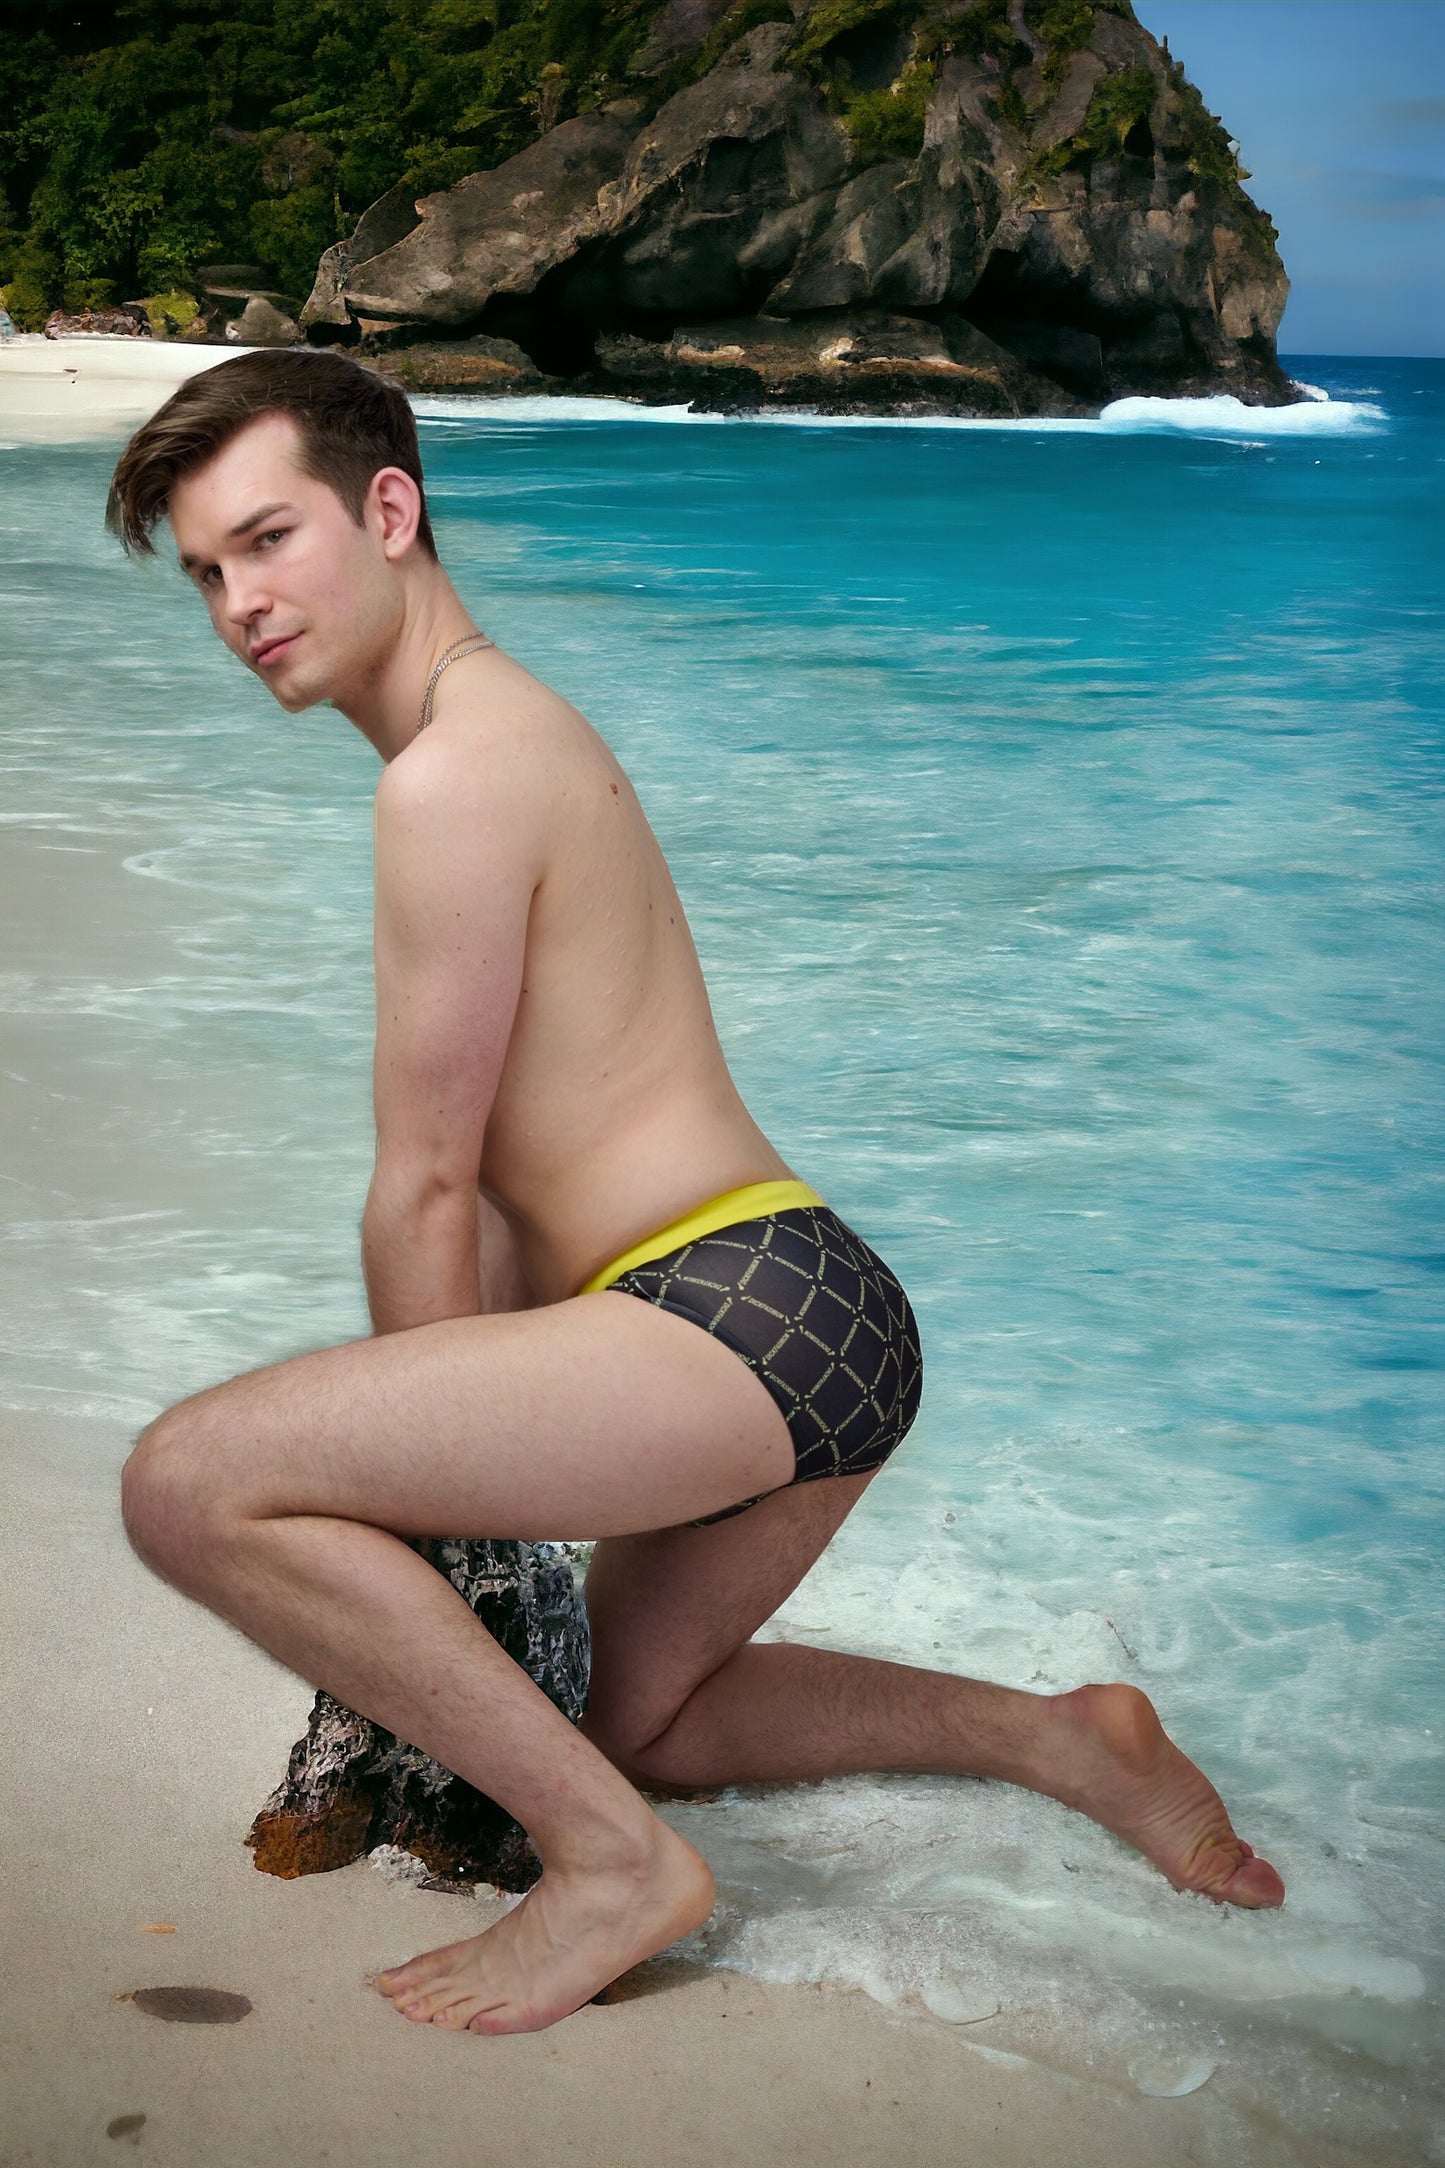 Swimming trunks, nice speedos in black with yellow pattern